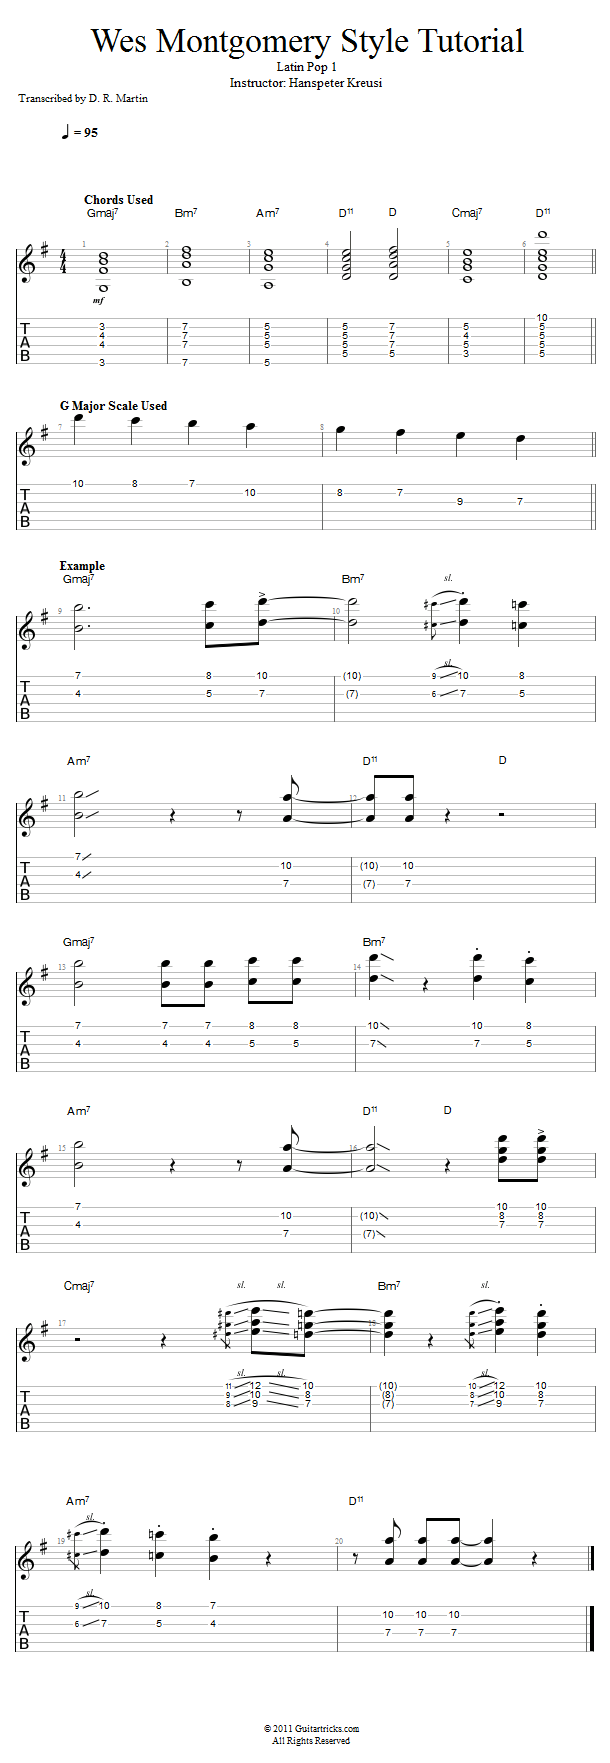 Wes Montgomery Style: Latin Pop 1 song notation